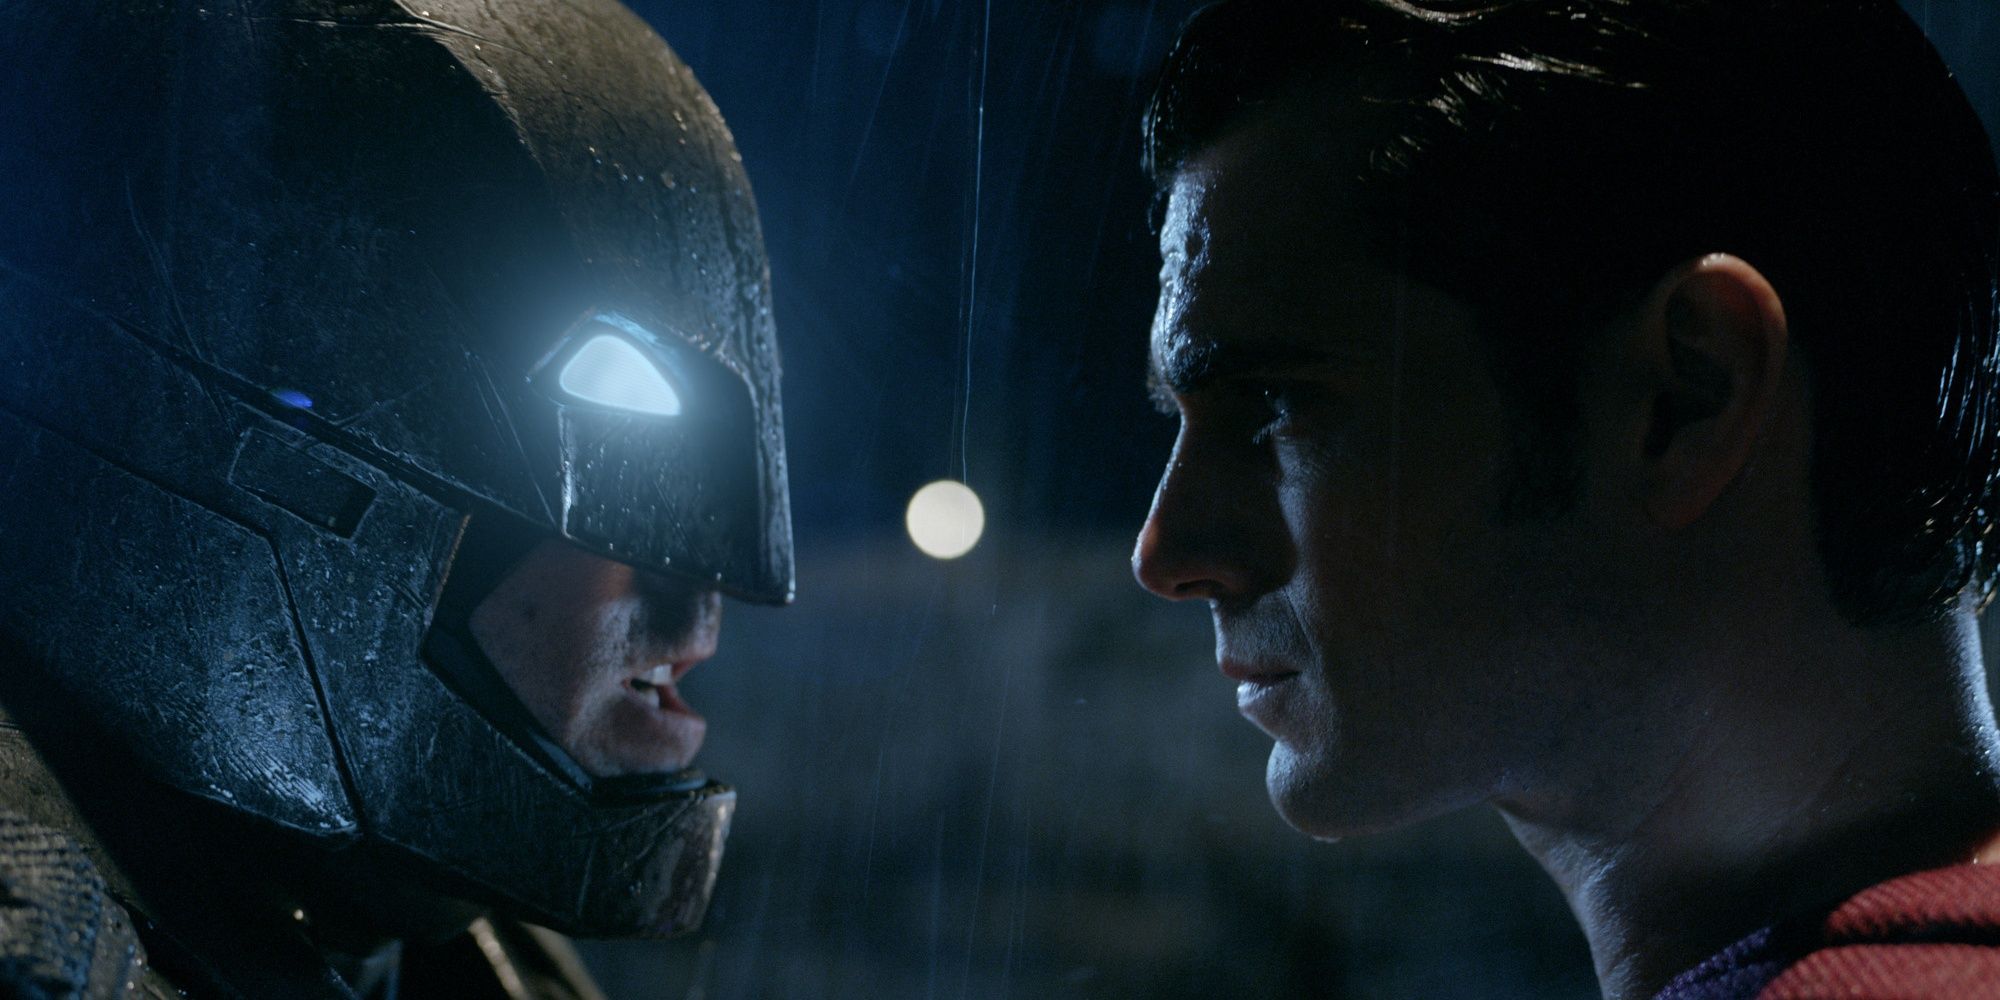 Batman in his special suit faces off against Superman in Batman v Superman: Dawn of Justice